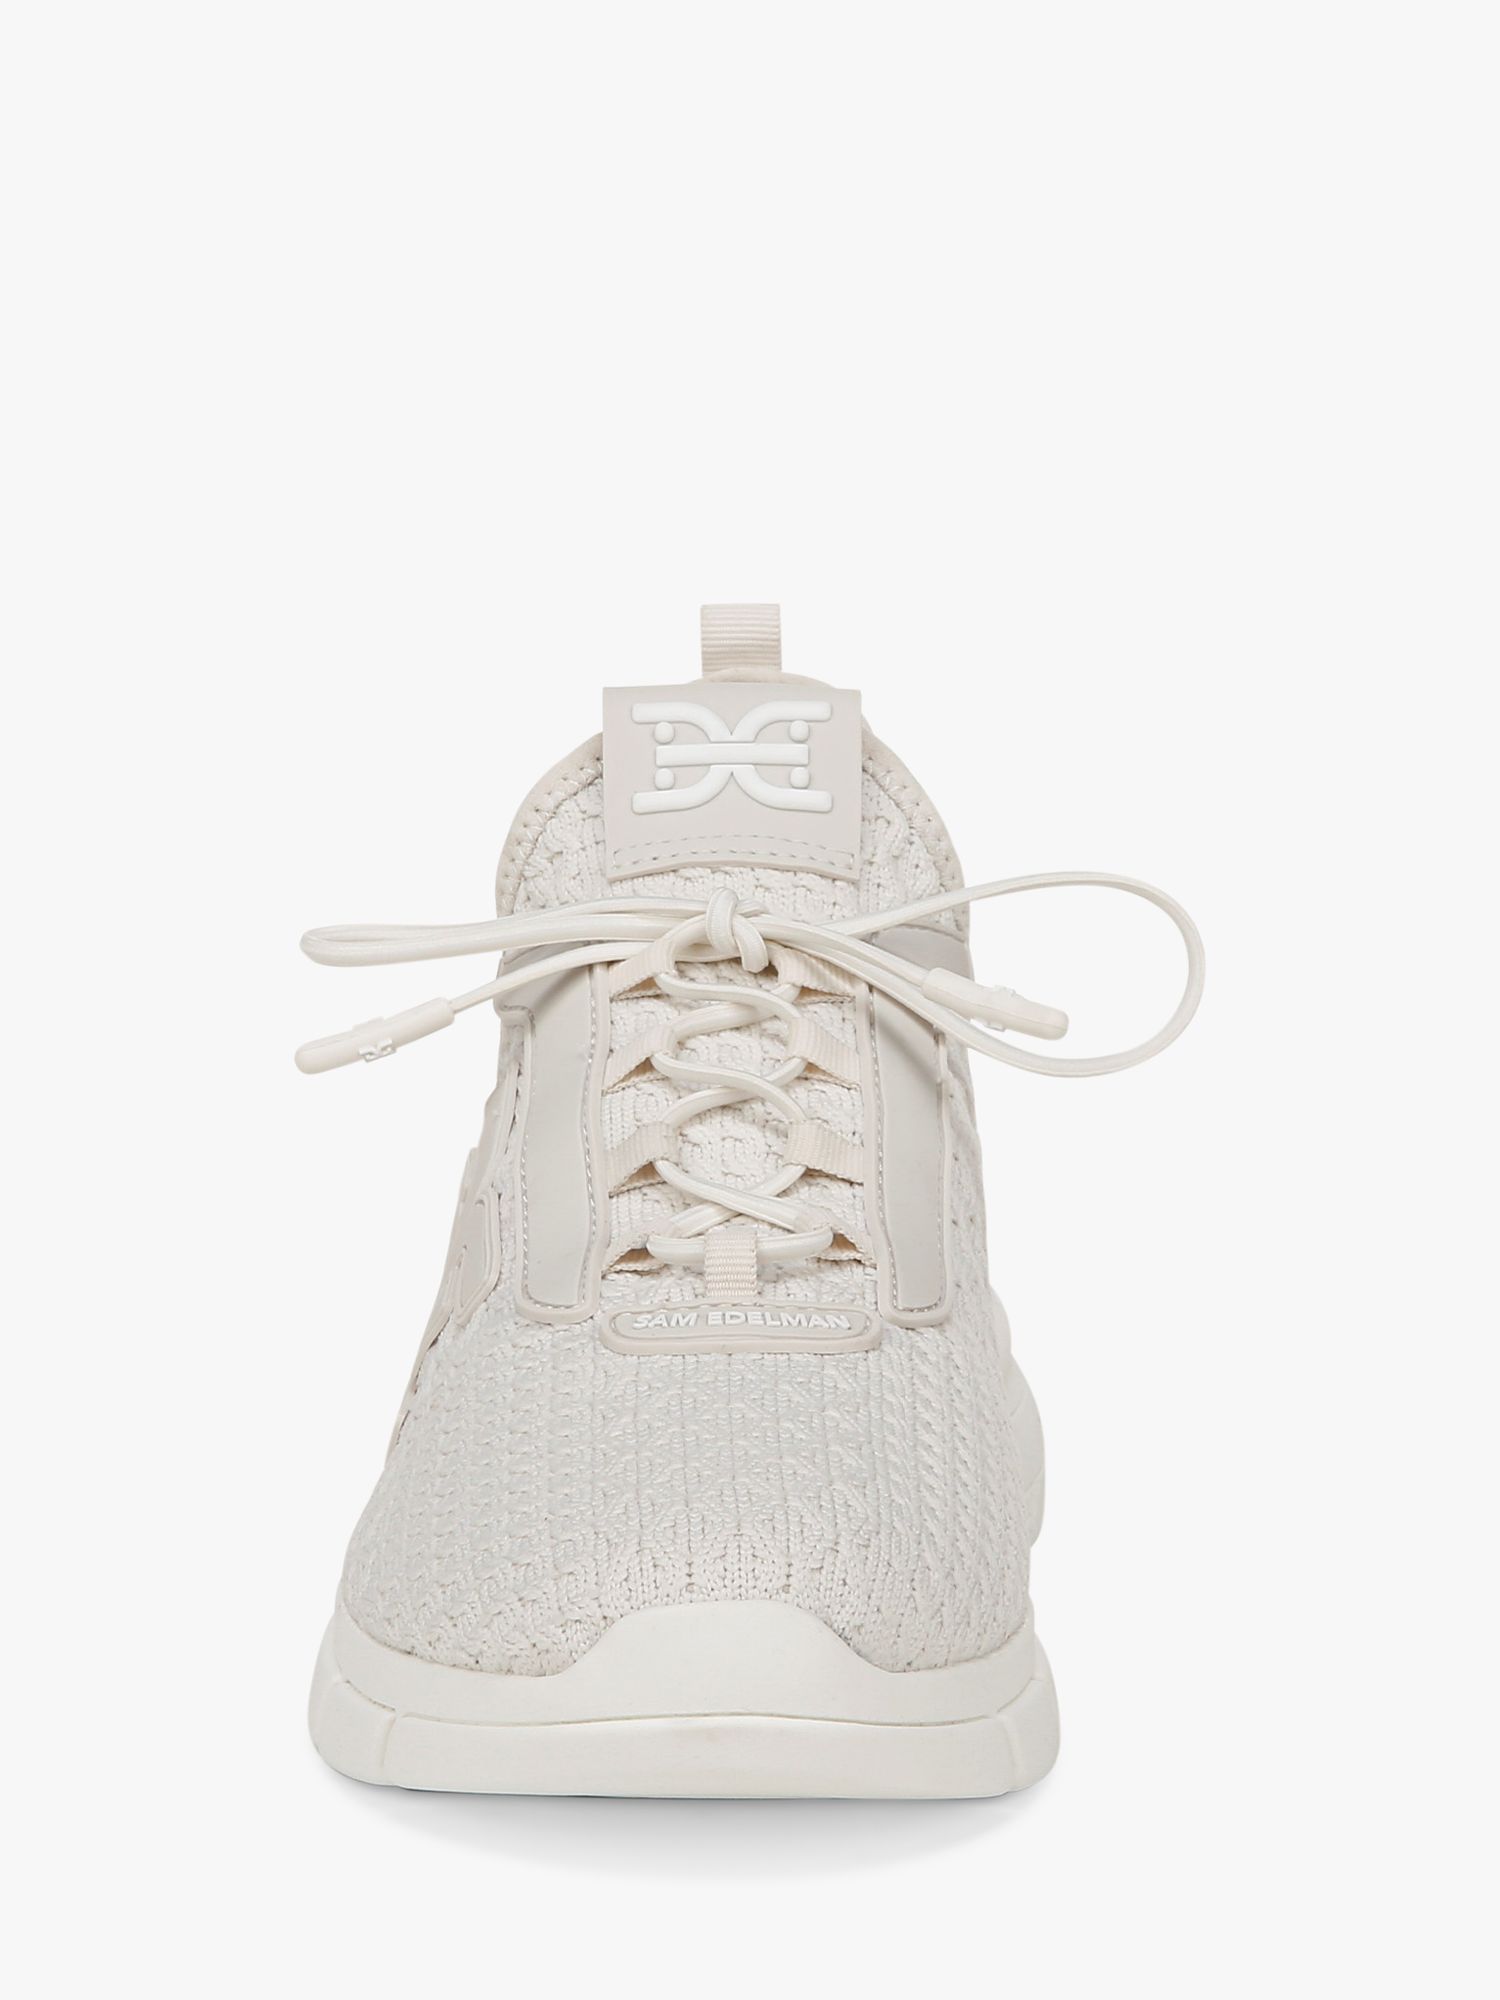 Buy Sam Edelman Cami Knitted Trainers, Cream Online at johnlewis.com